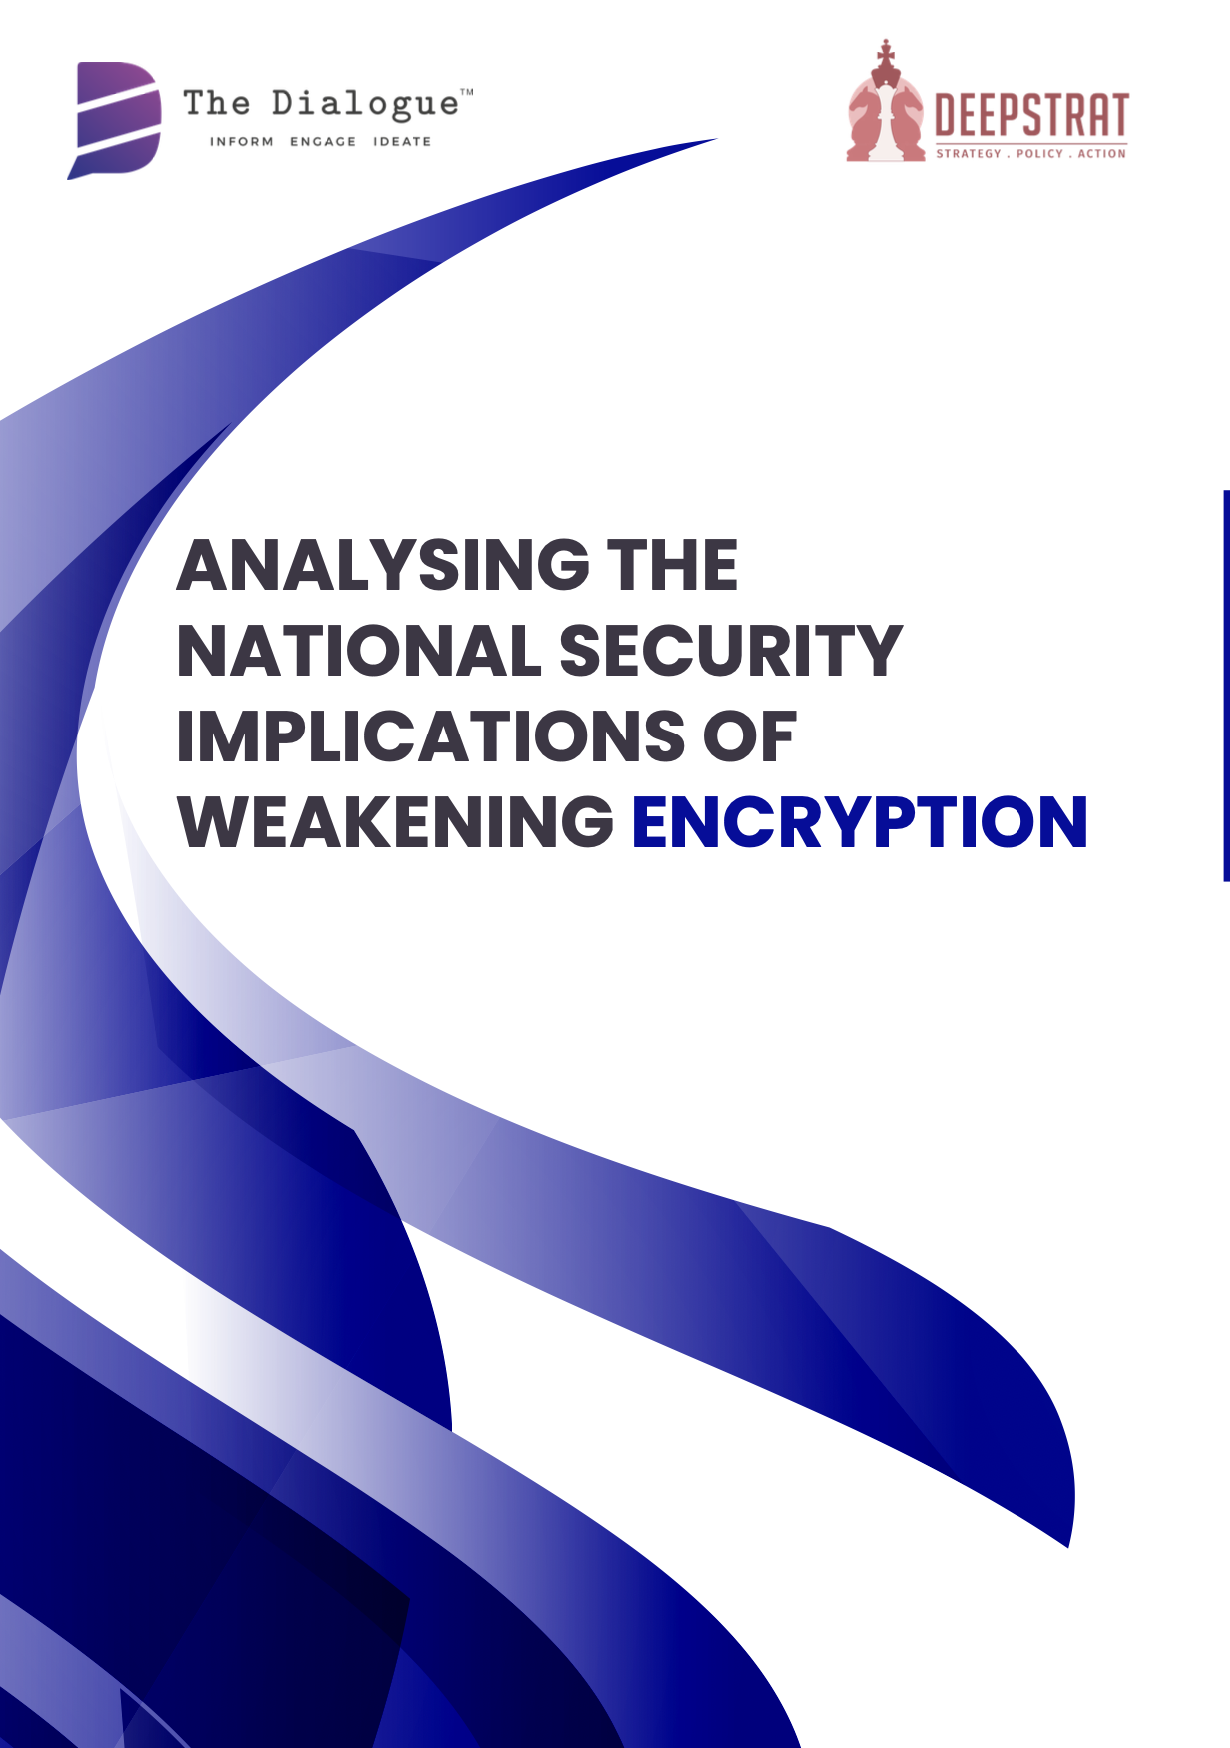 Executive Summary & Recommendations: Report on Analysing the National Security Implication of Weakening Encryption